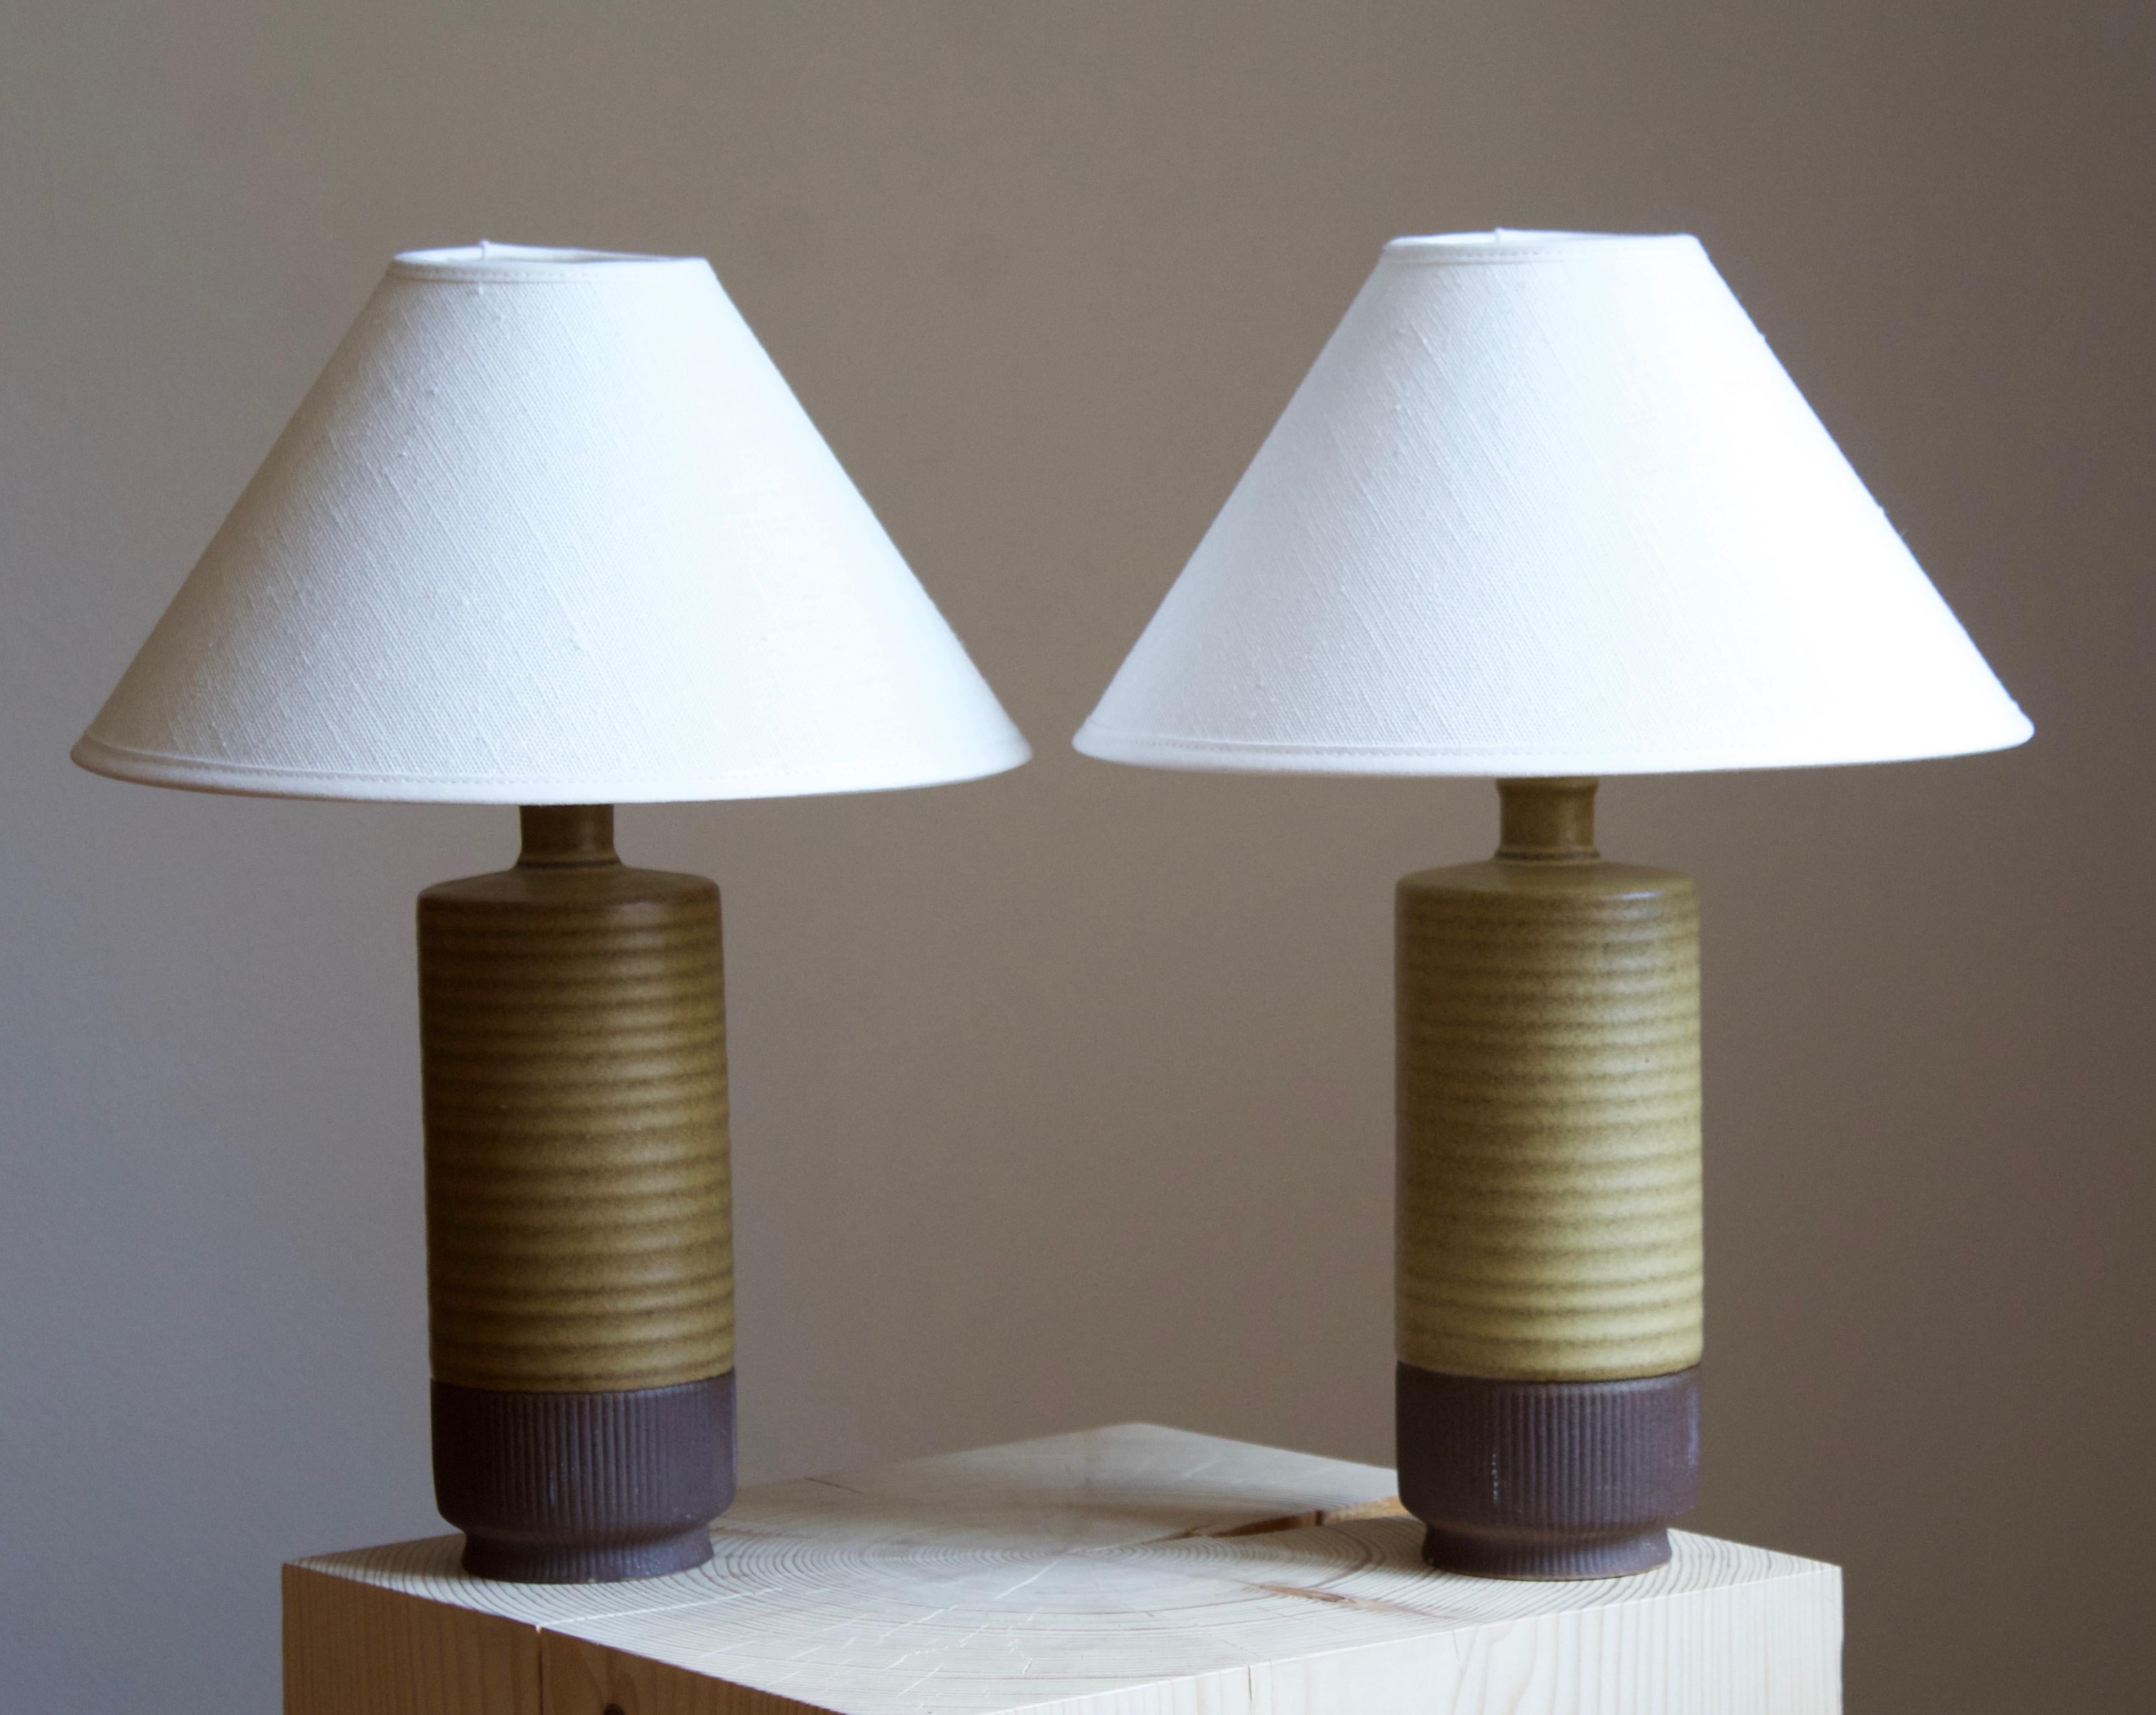 A pair of table lamps produced by Rörstrand, Sweden, 1950s. Designed by Gunnar Nylund, (Swedish, 1914-1997). Signed. 

Sold without lampshades. Stated dimensions exclude lampshade, height includes socket.

Nylund served as artistic director at